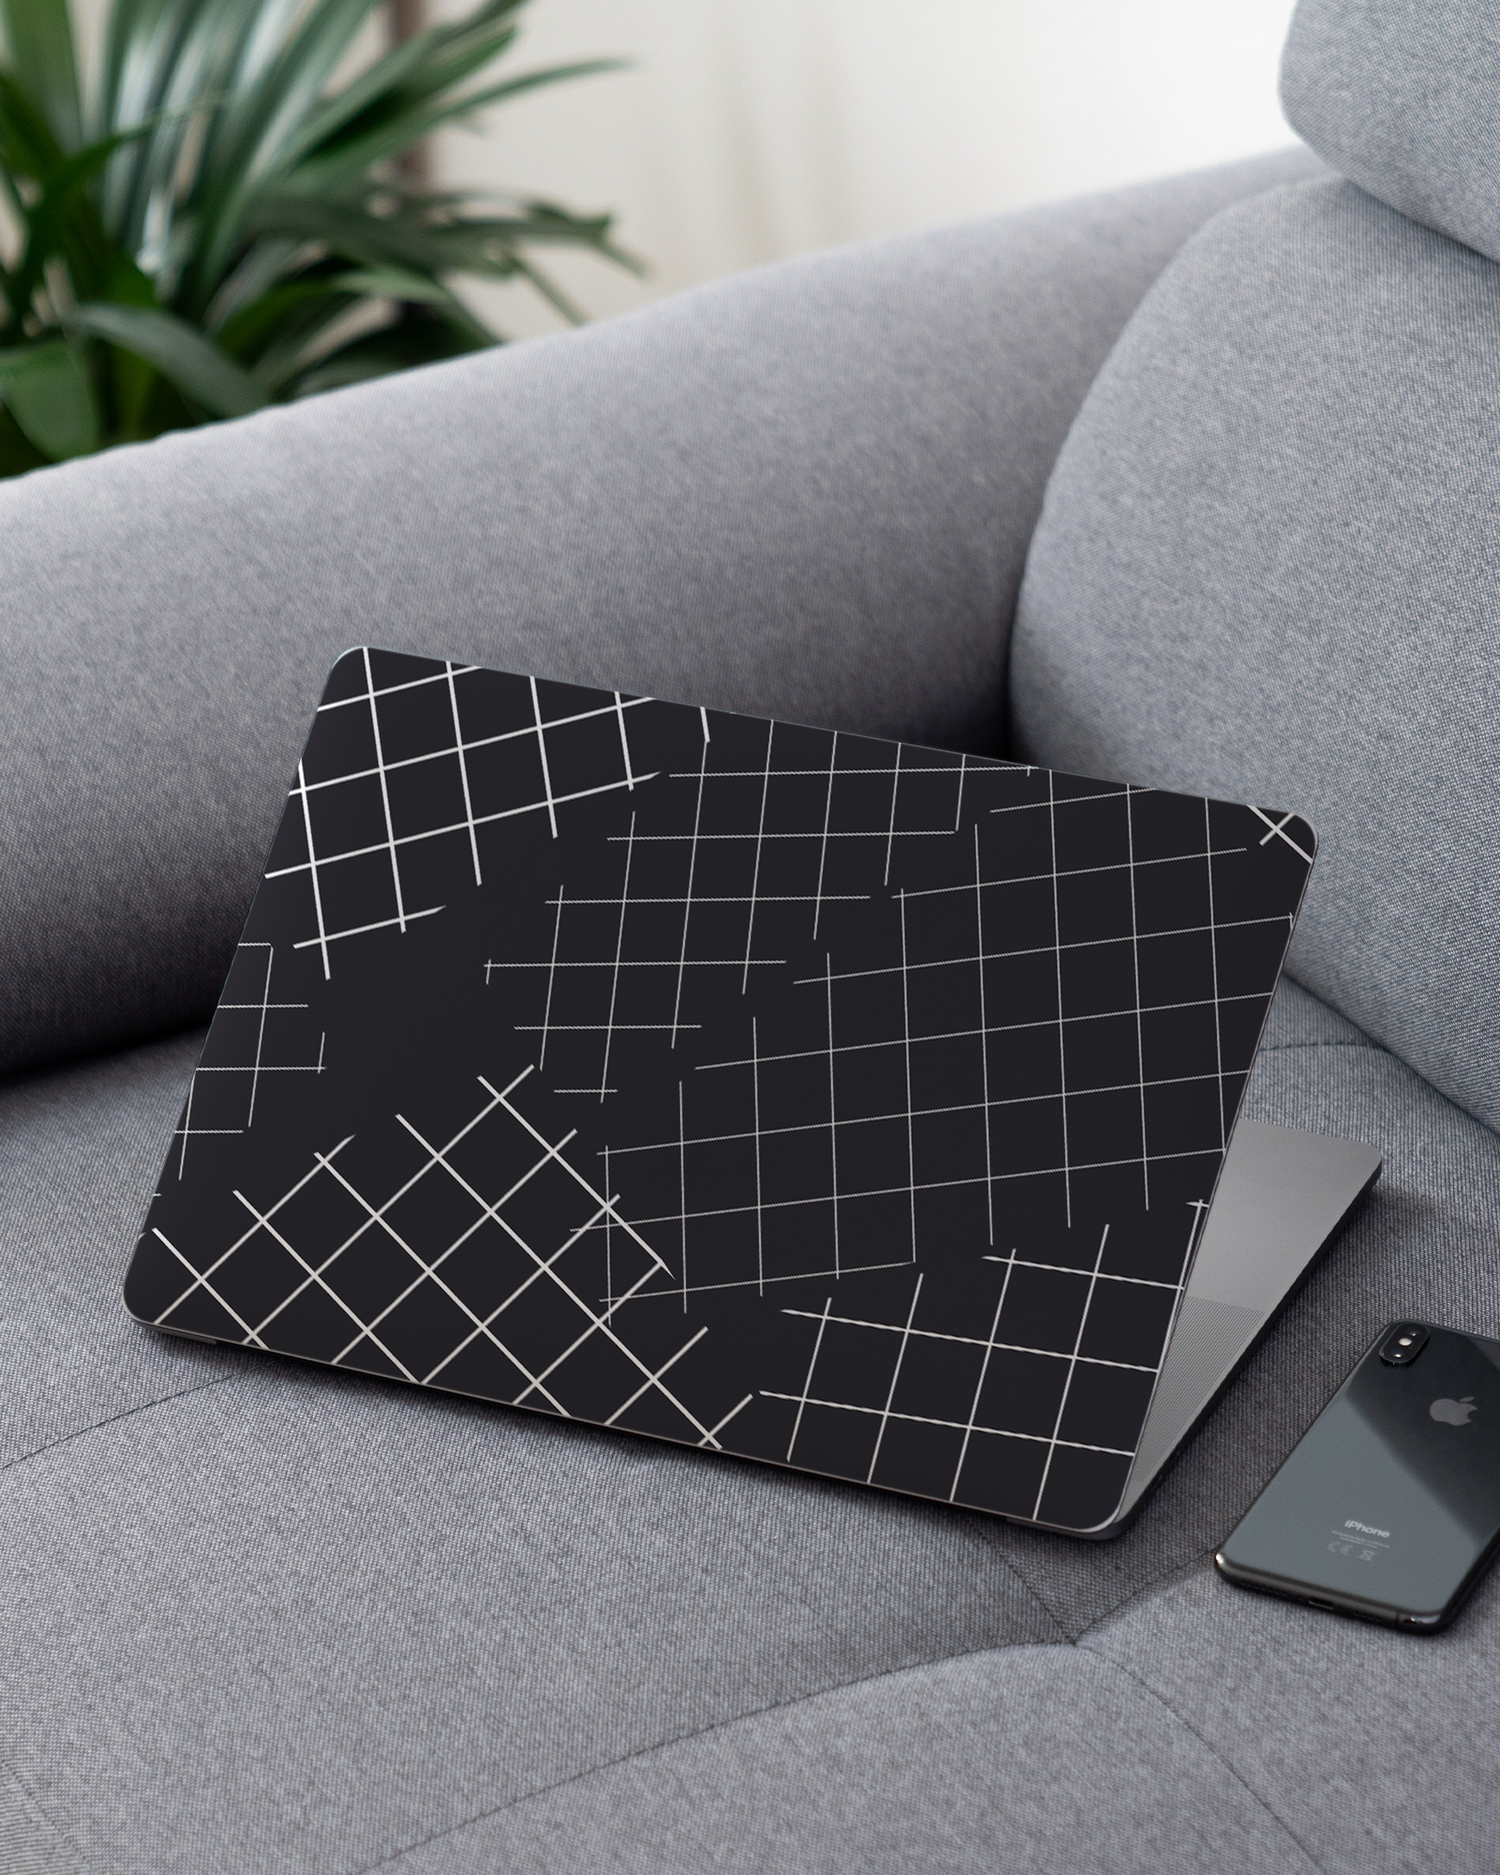 Grids Laptop Skin for 13 inch Apple MacBooks on a couch